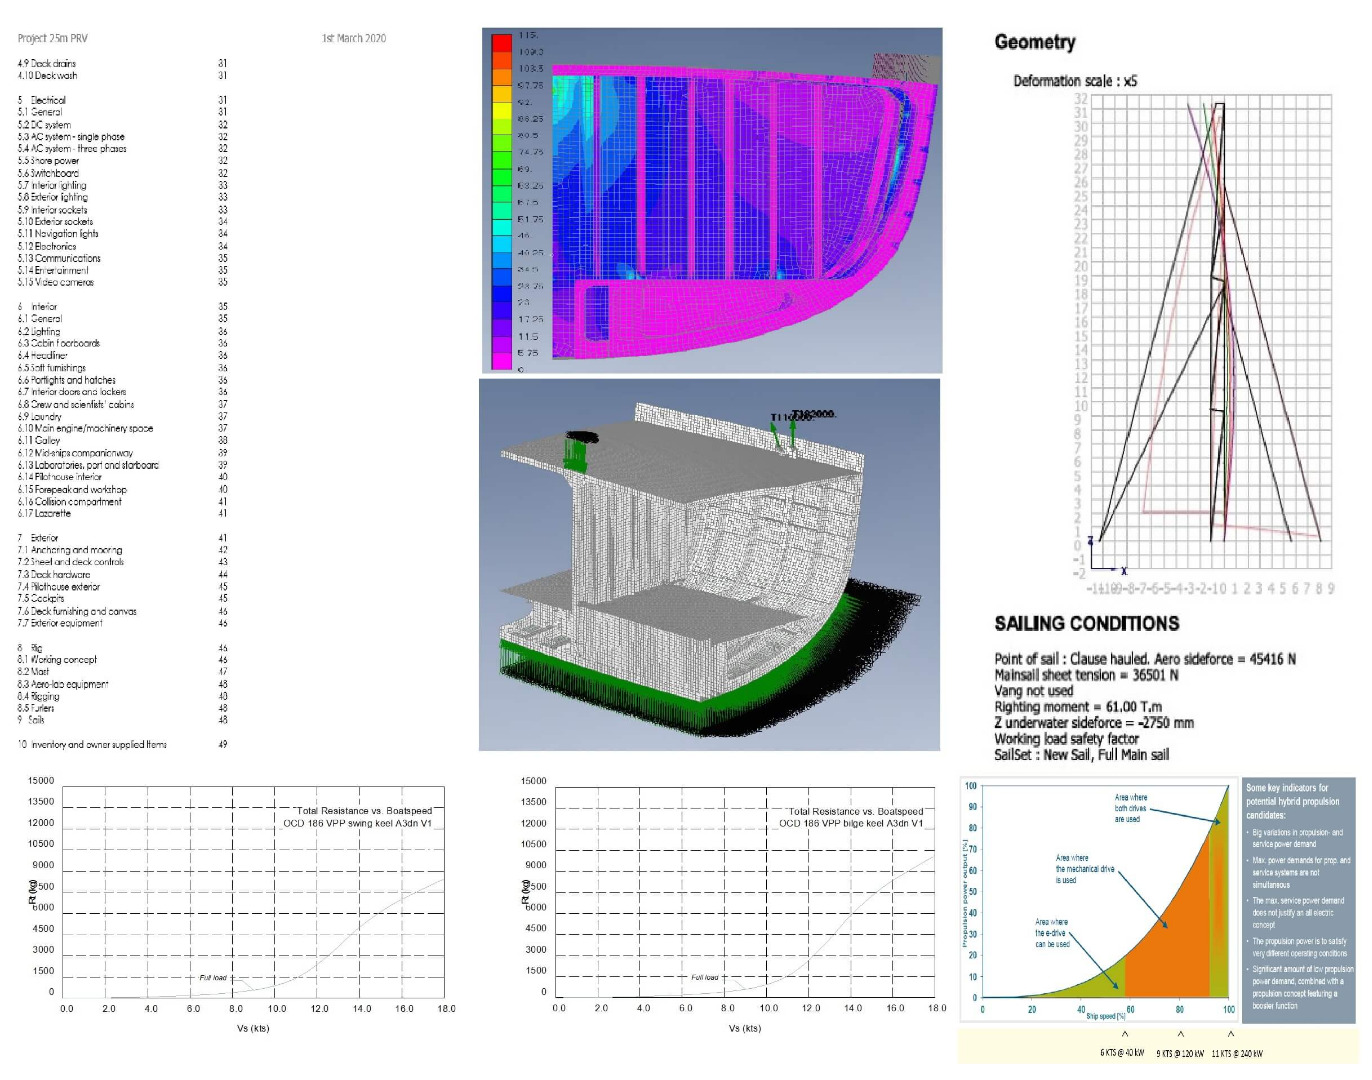 This is a composite screenshot showing information pertaining to the design of an ice strengthened aluminium 25m high latitude yacht that began life as a project for a scientific organisation to study climate change and conservation in the polar regions. A considerable amount of preliminary design has already been undertaken including into hybrid drive propulsion and other systems designed to limit the vessel’s emissions and impact on the environment. The screen shots show stability curve, powering calculations, FEA structural engineering and rig design work undertaken.